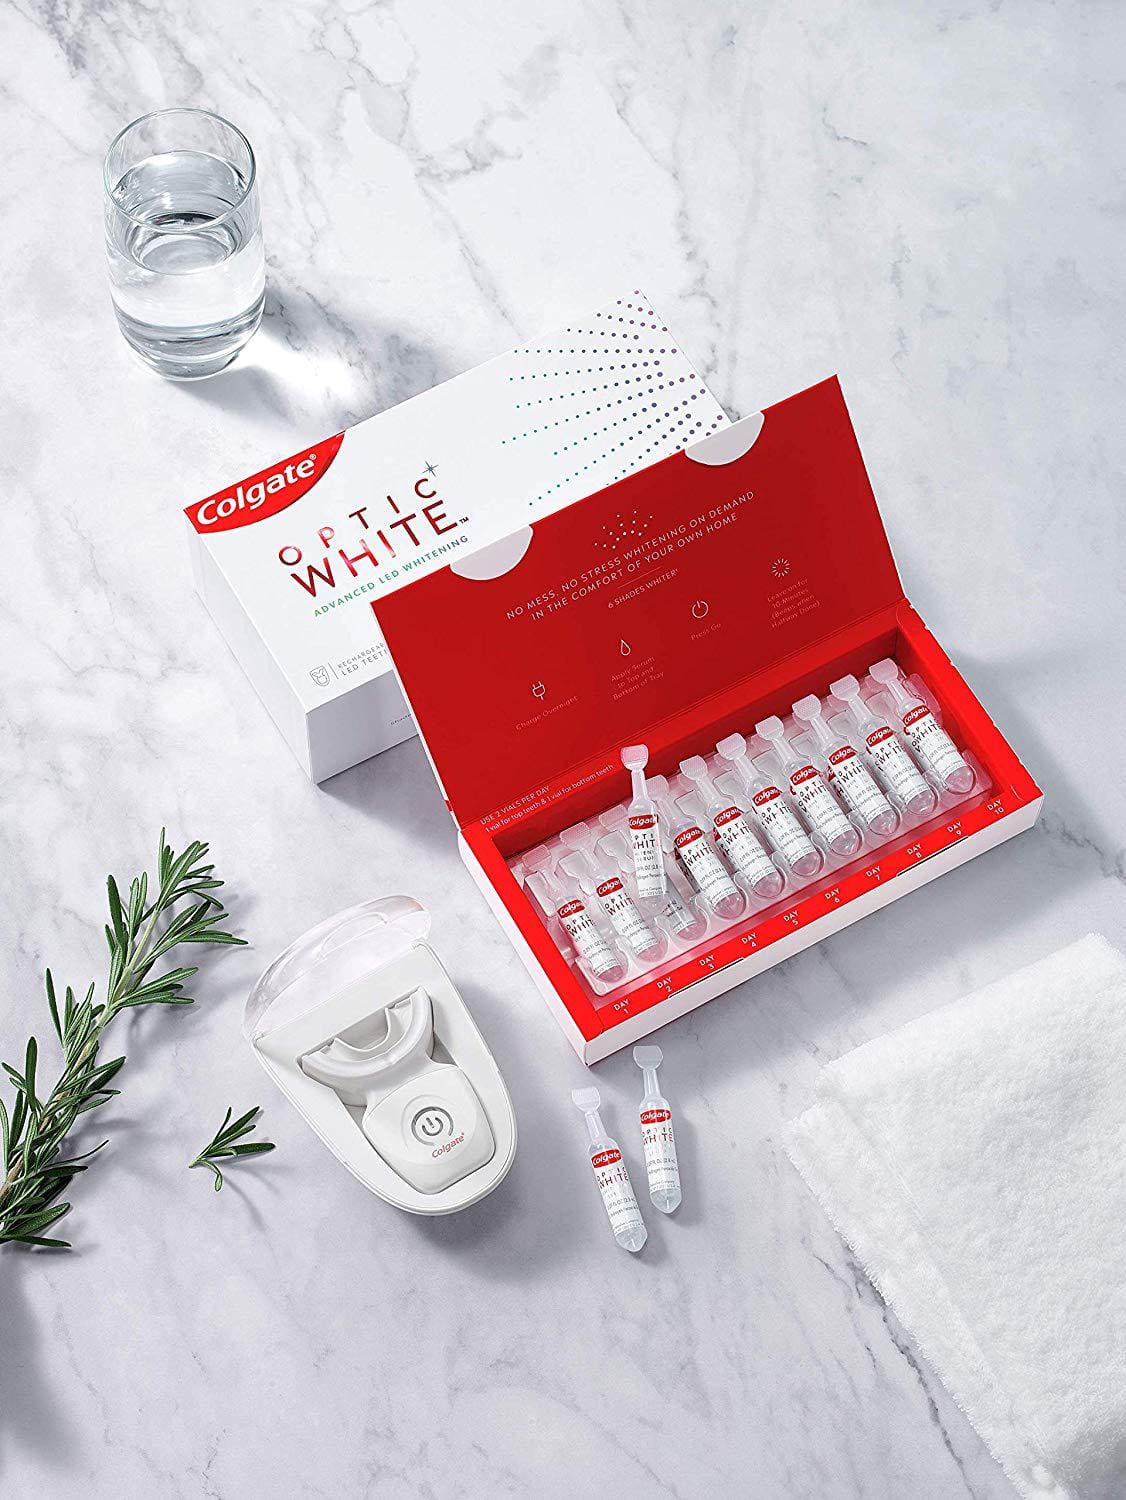 25 Last-Minute Health And Beauty Products For Christmas 2019